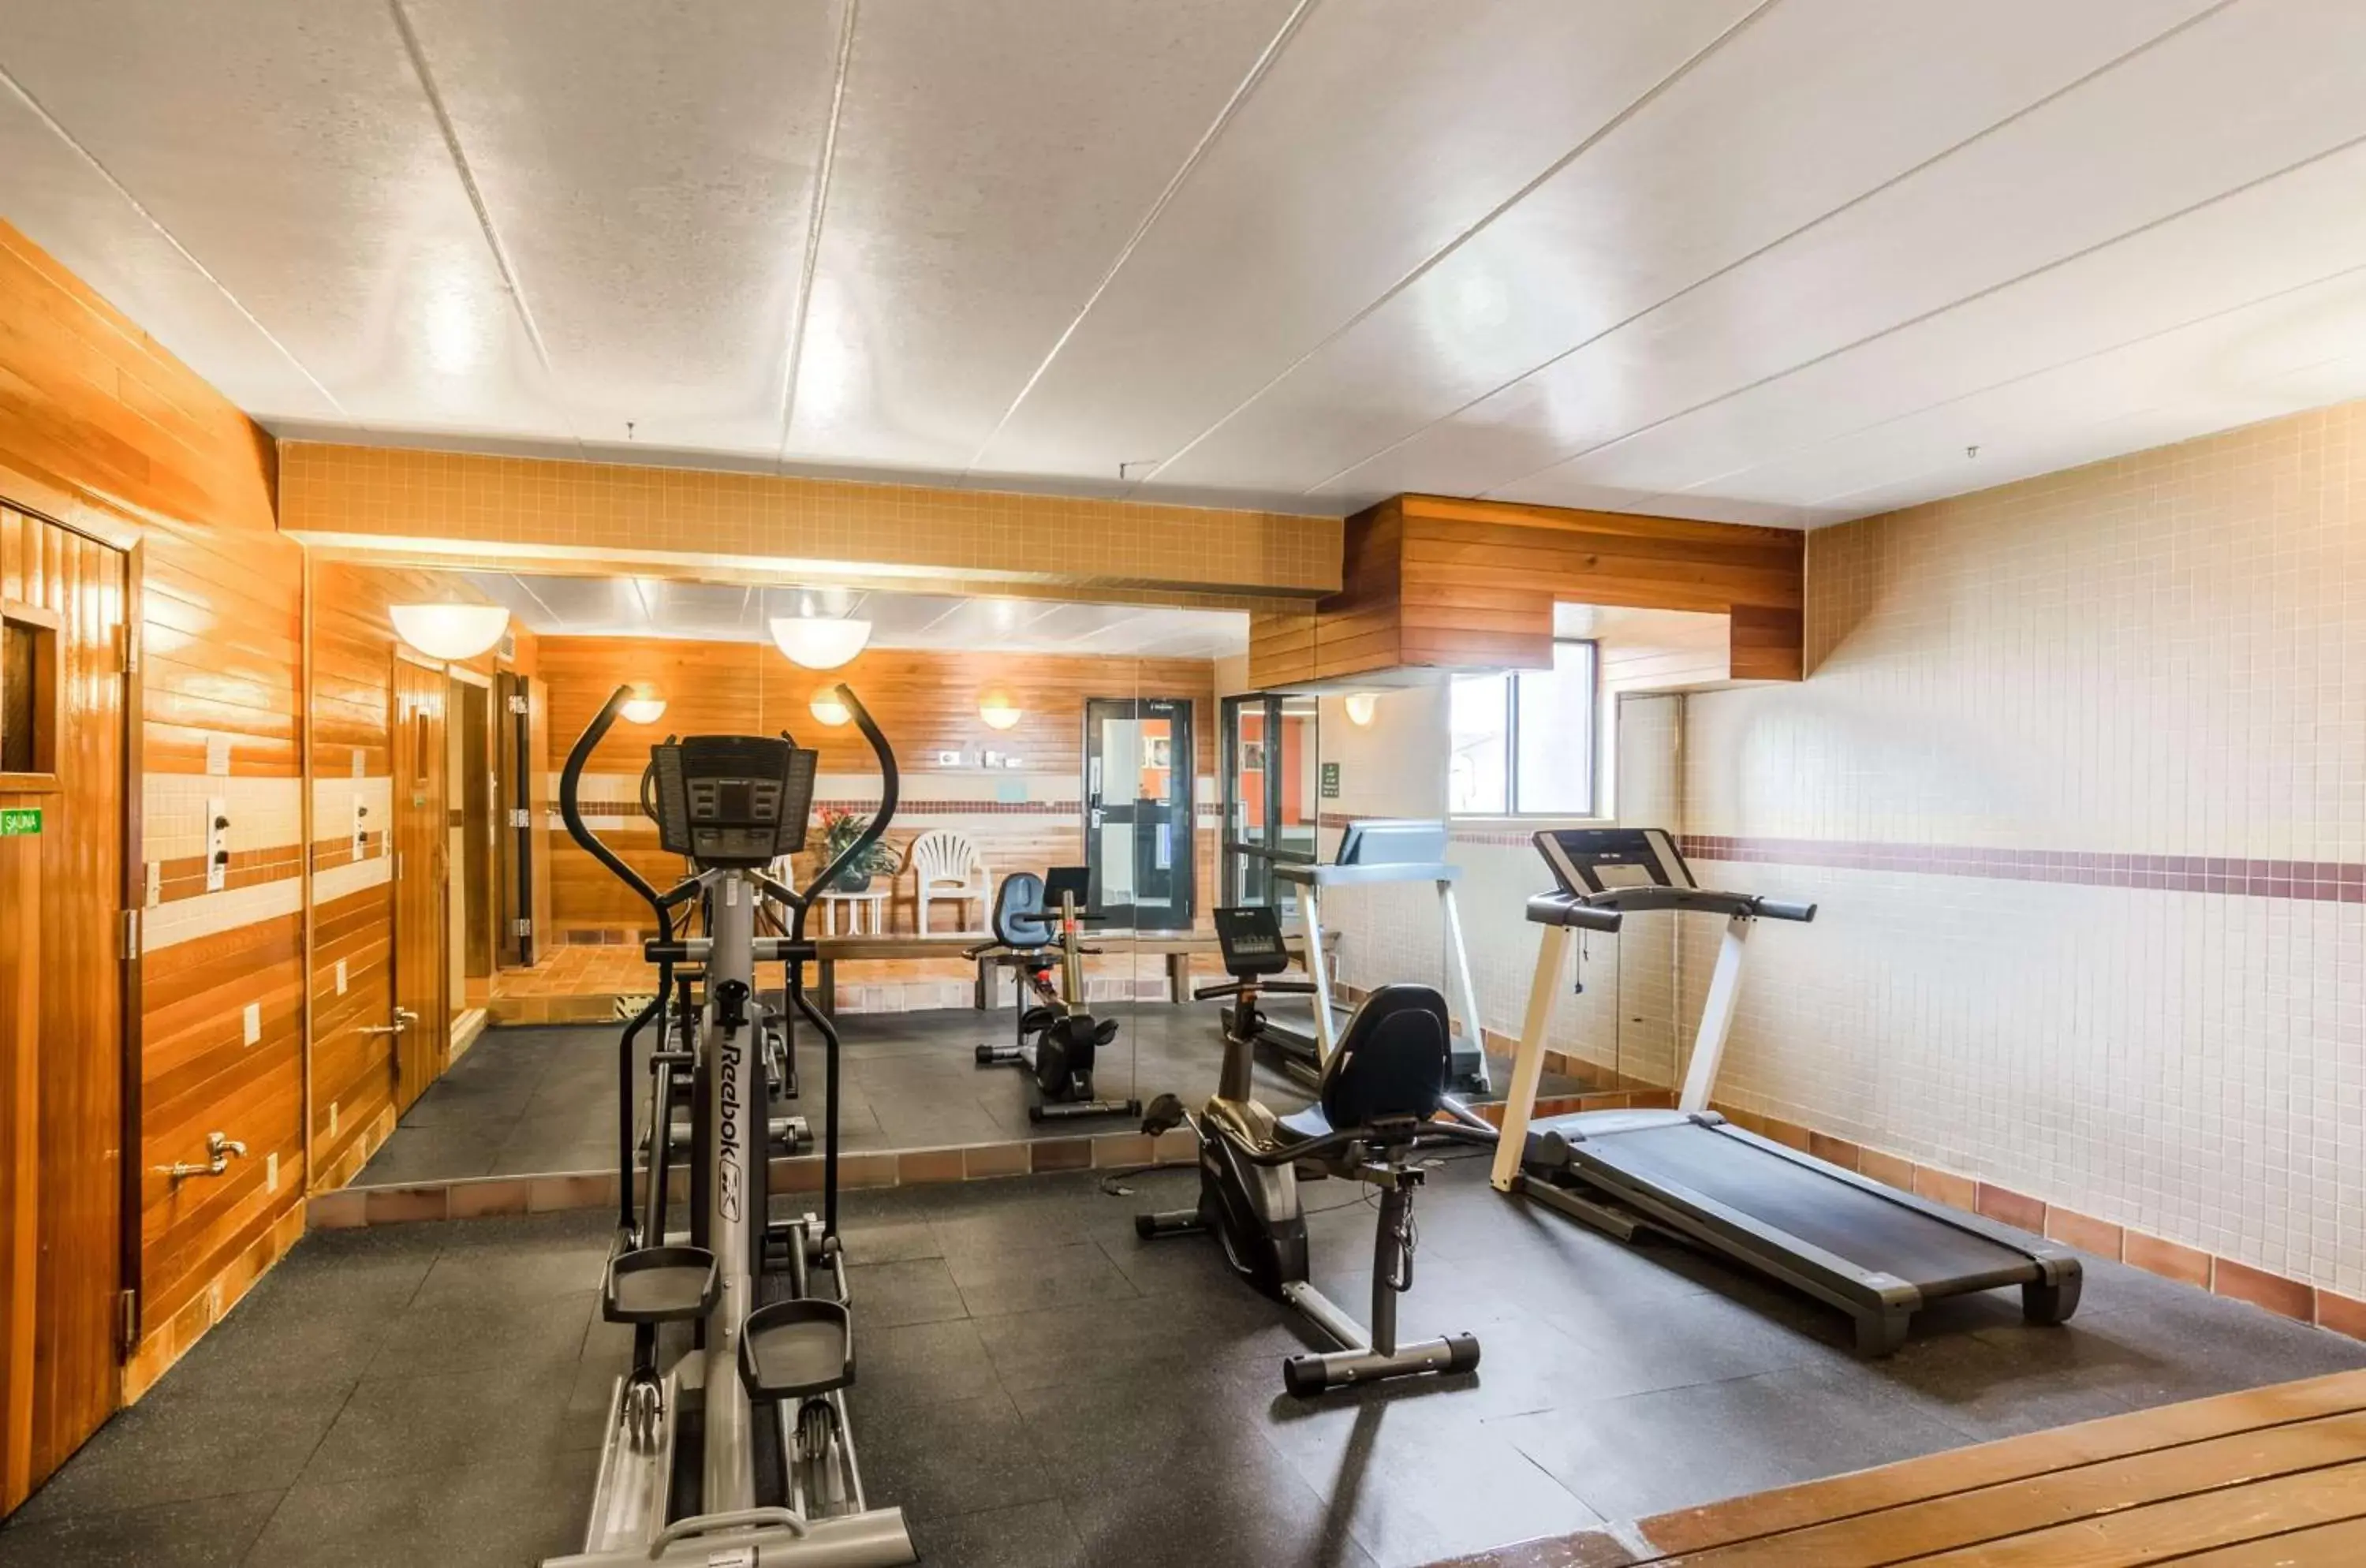 Fitness centre/facilities, Fitness Center/Facilities in Baymont by Wyndham Gillette